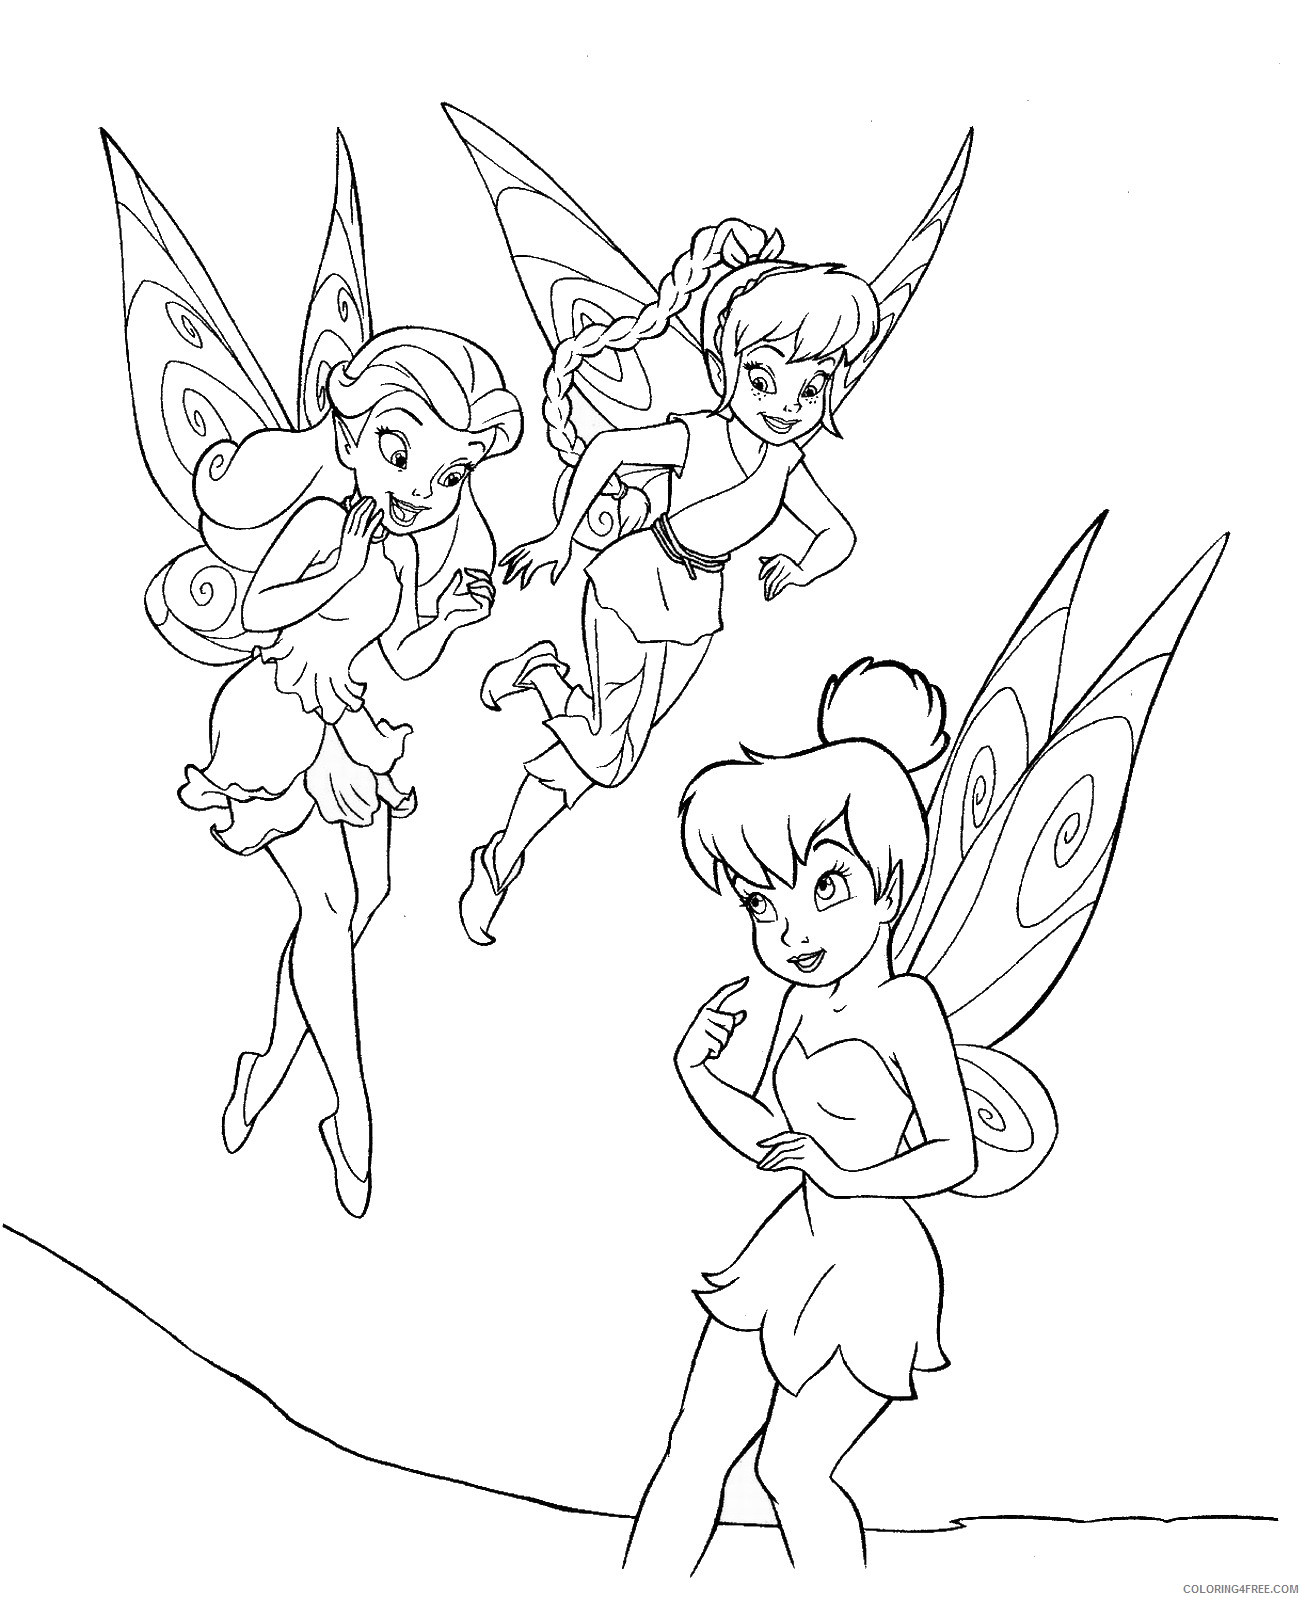 Tinker Bell Coloring Pages Cartoons tinkerbell_cl_03 Printable 2020 6610 Coloring4free